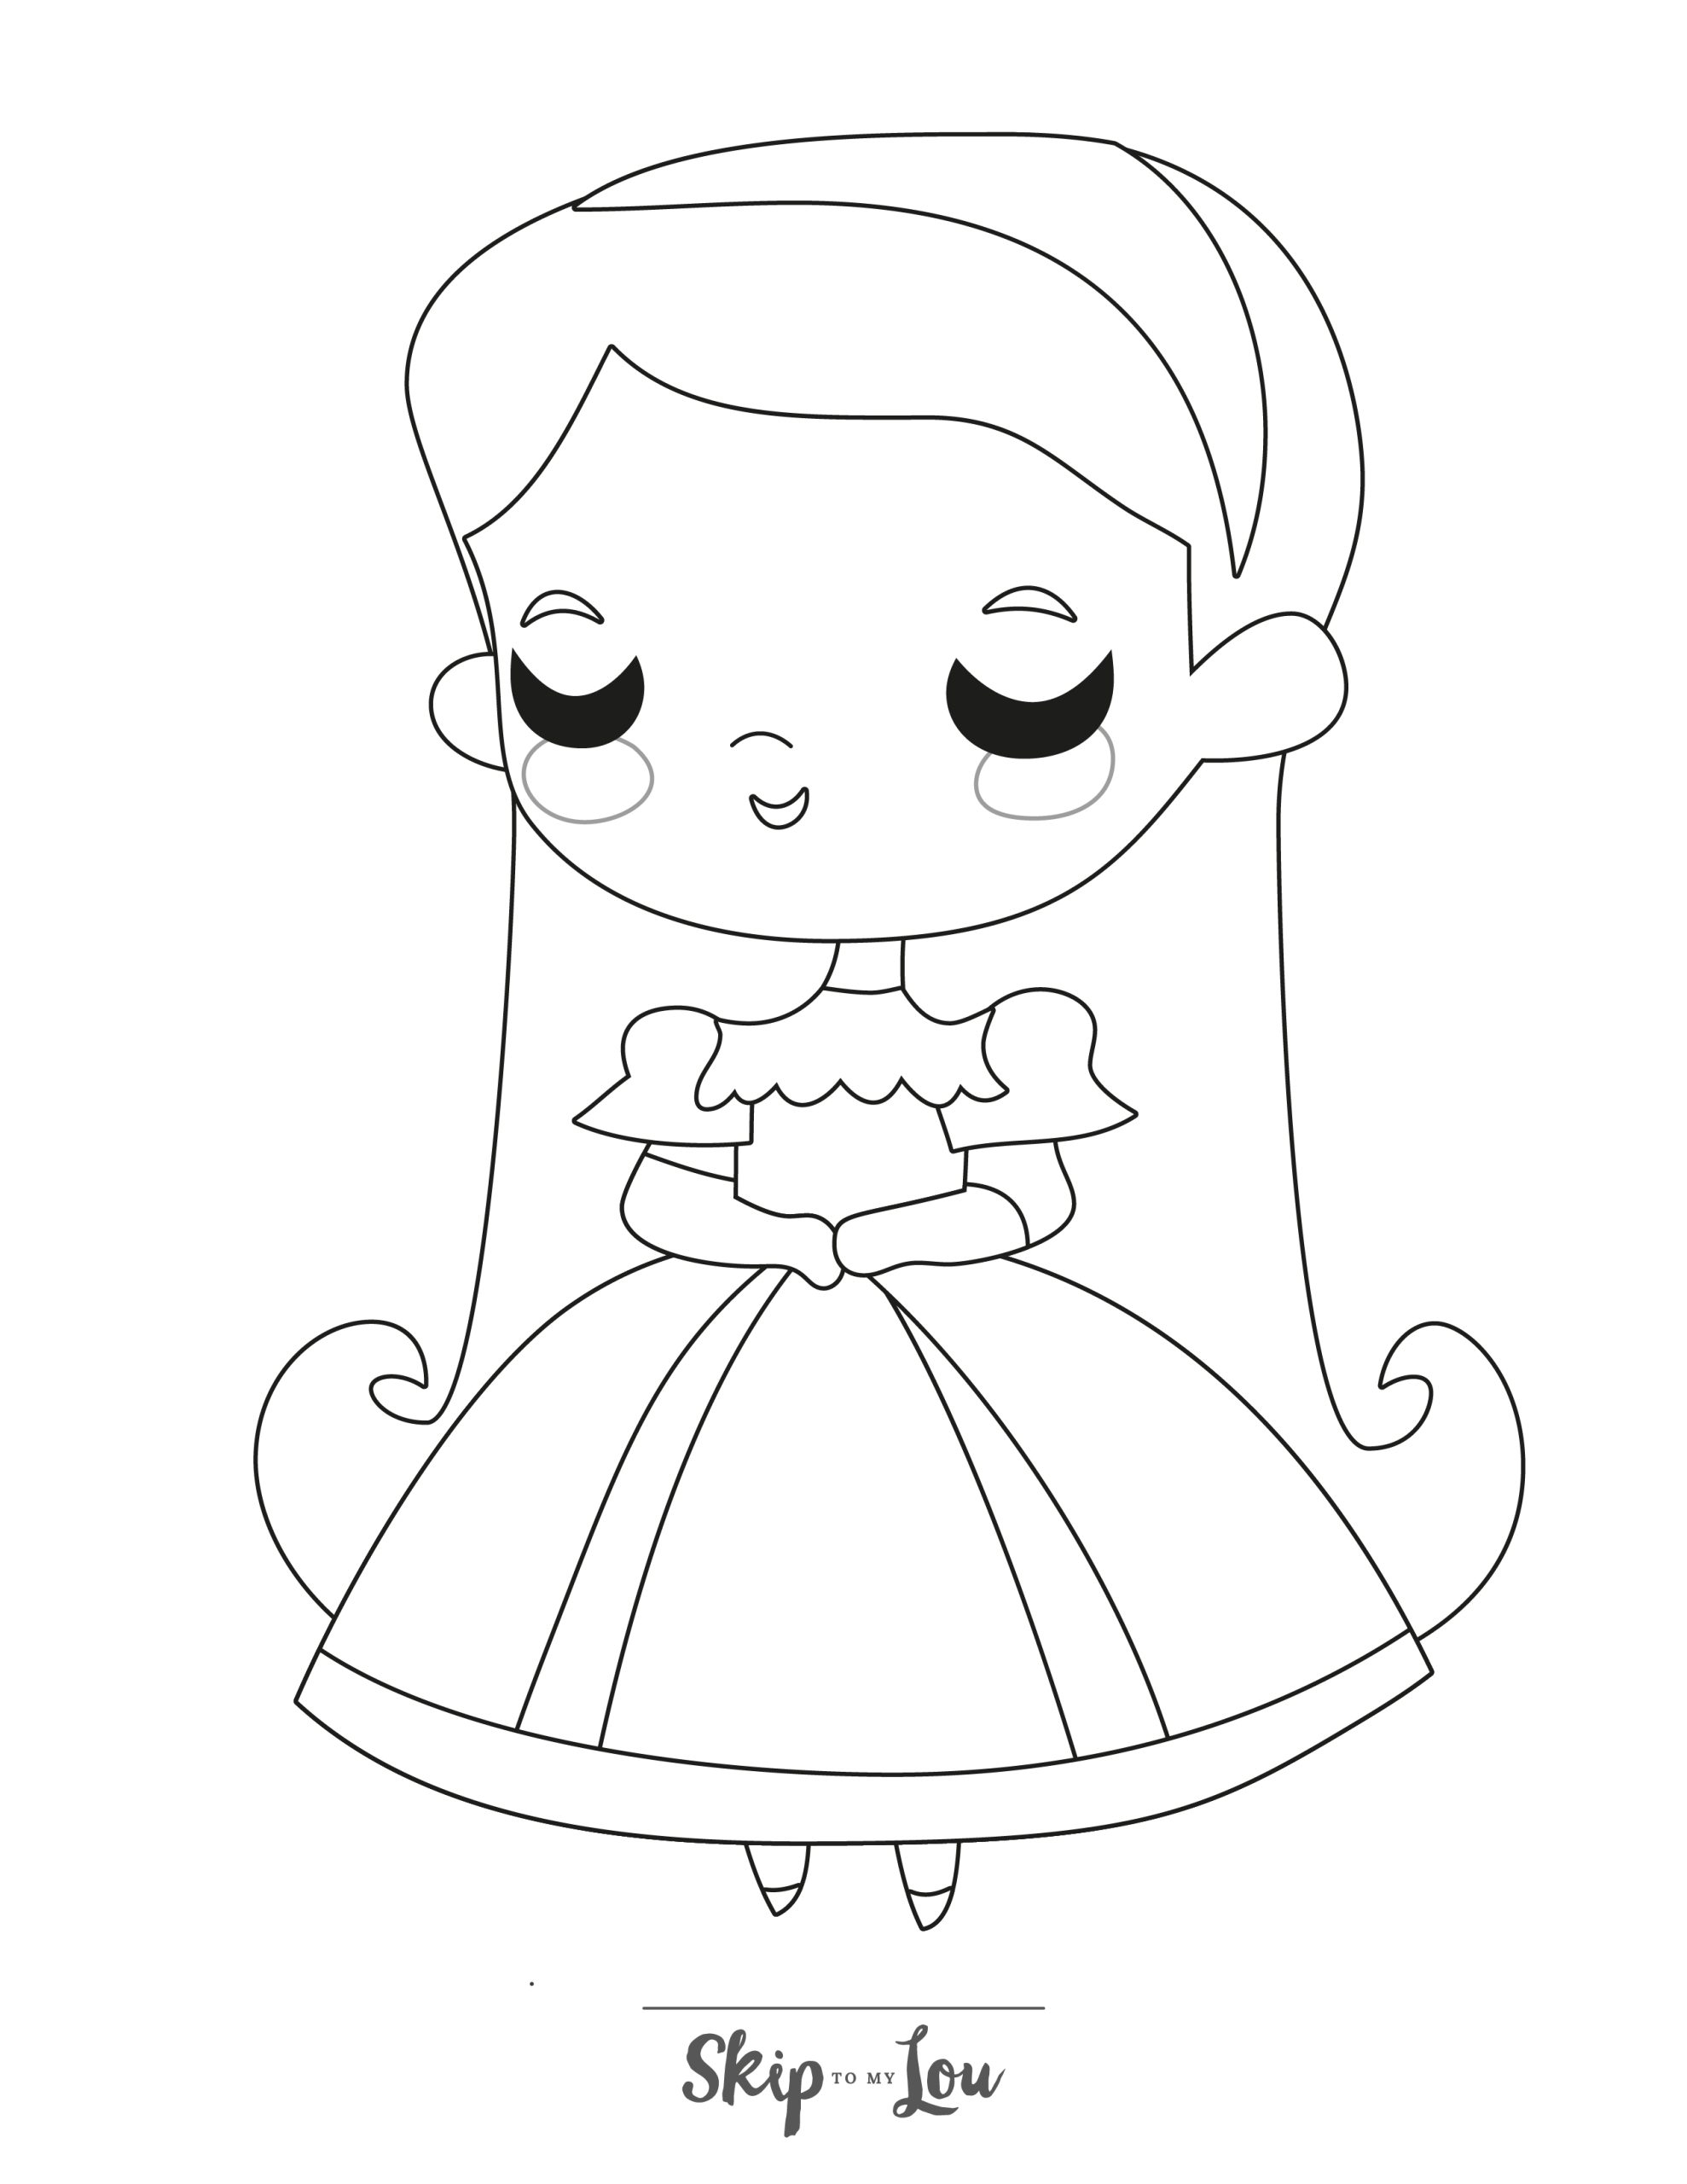 Rapunzel Coloring Page 11 - Line drawing of Rapunzel in the anime style